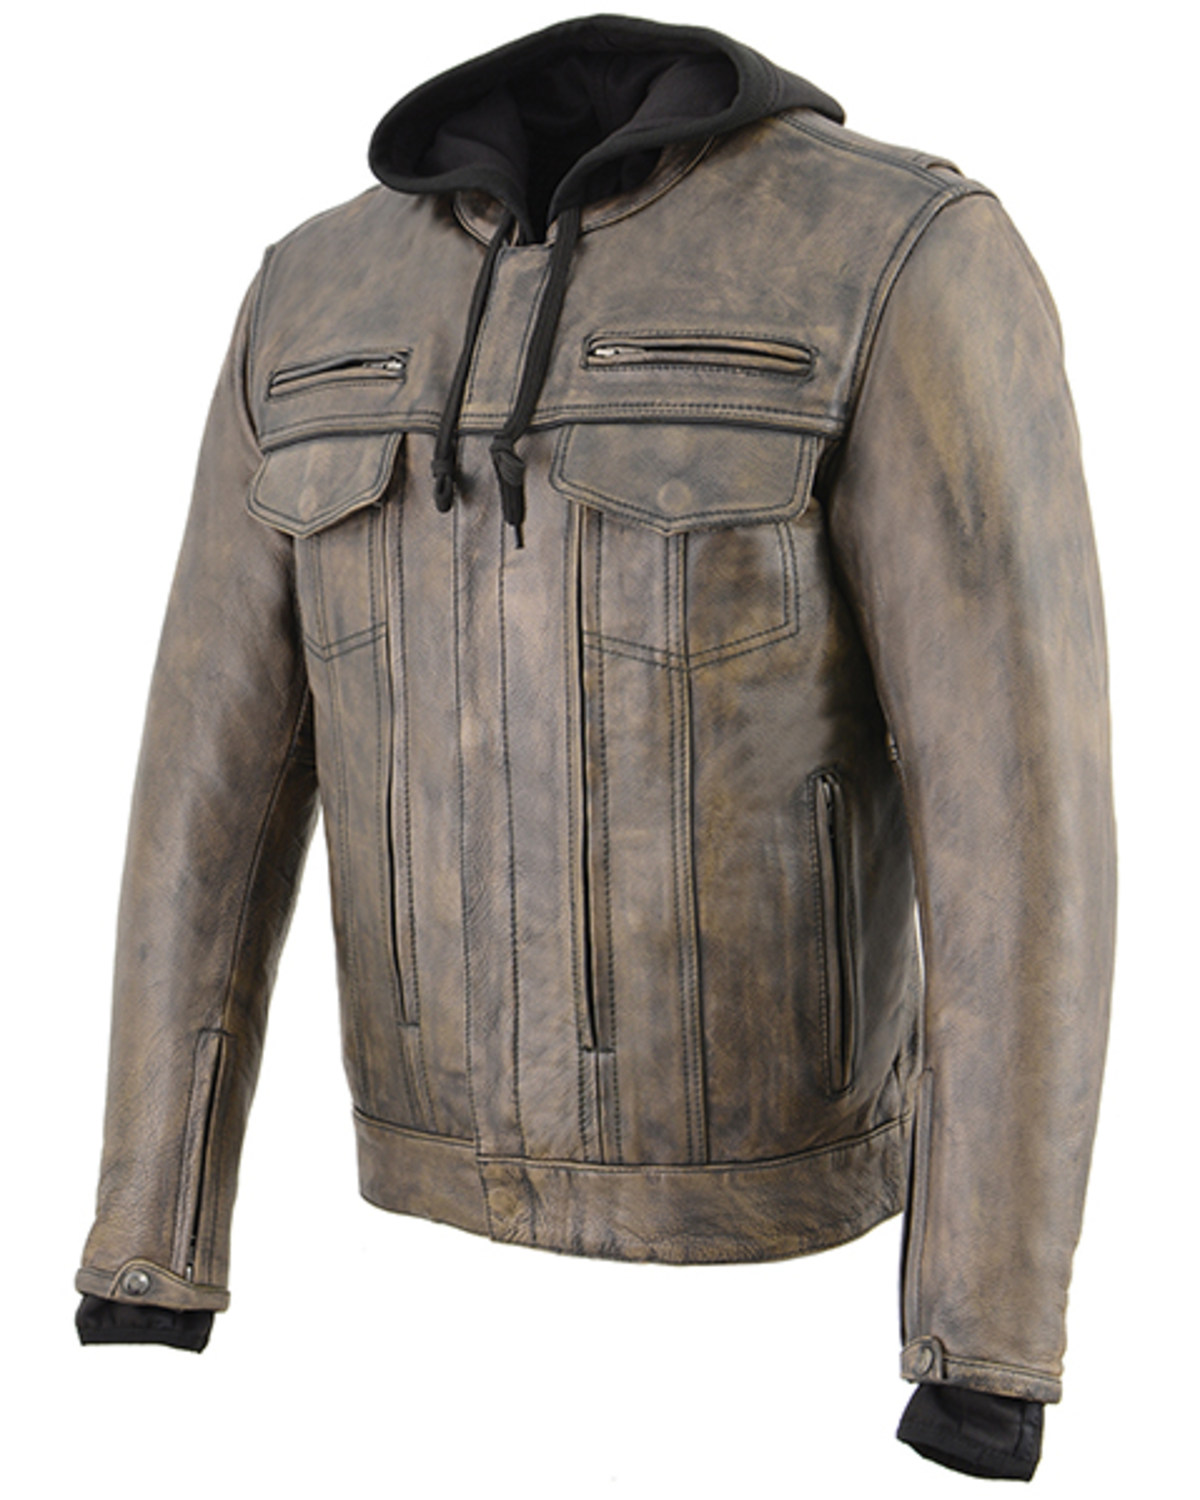 Milwaukee Leather Men's Distressed Utility Pocket Ventilated Concealed Carry Motorcycle Jacket